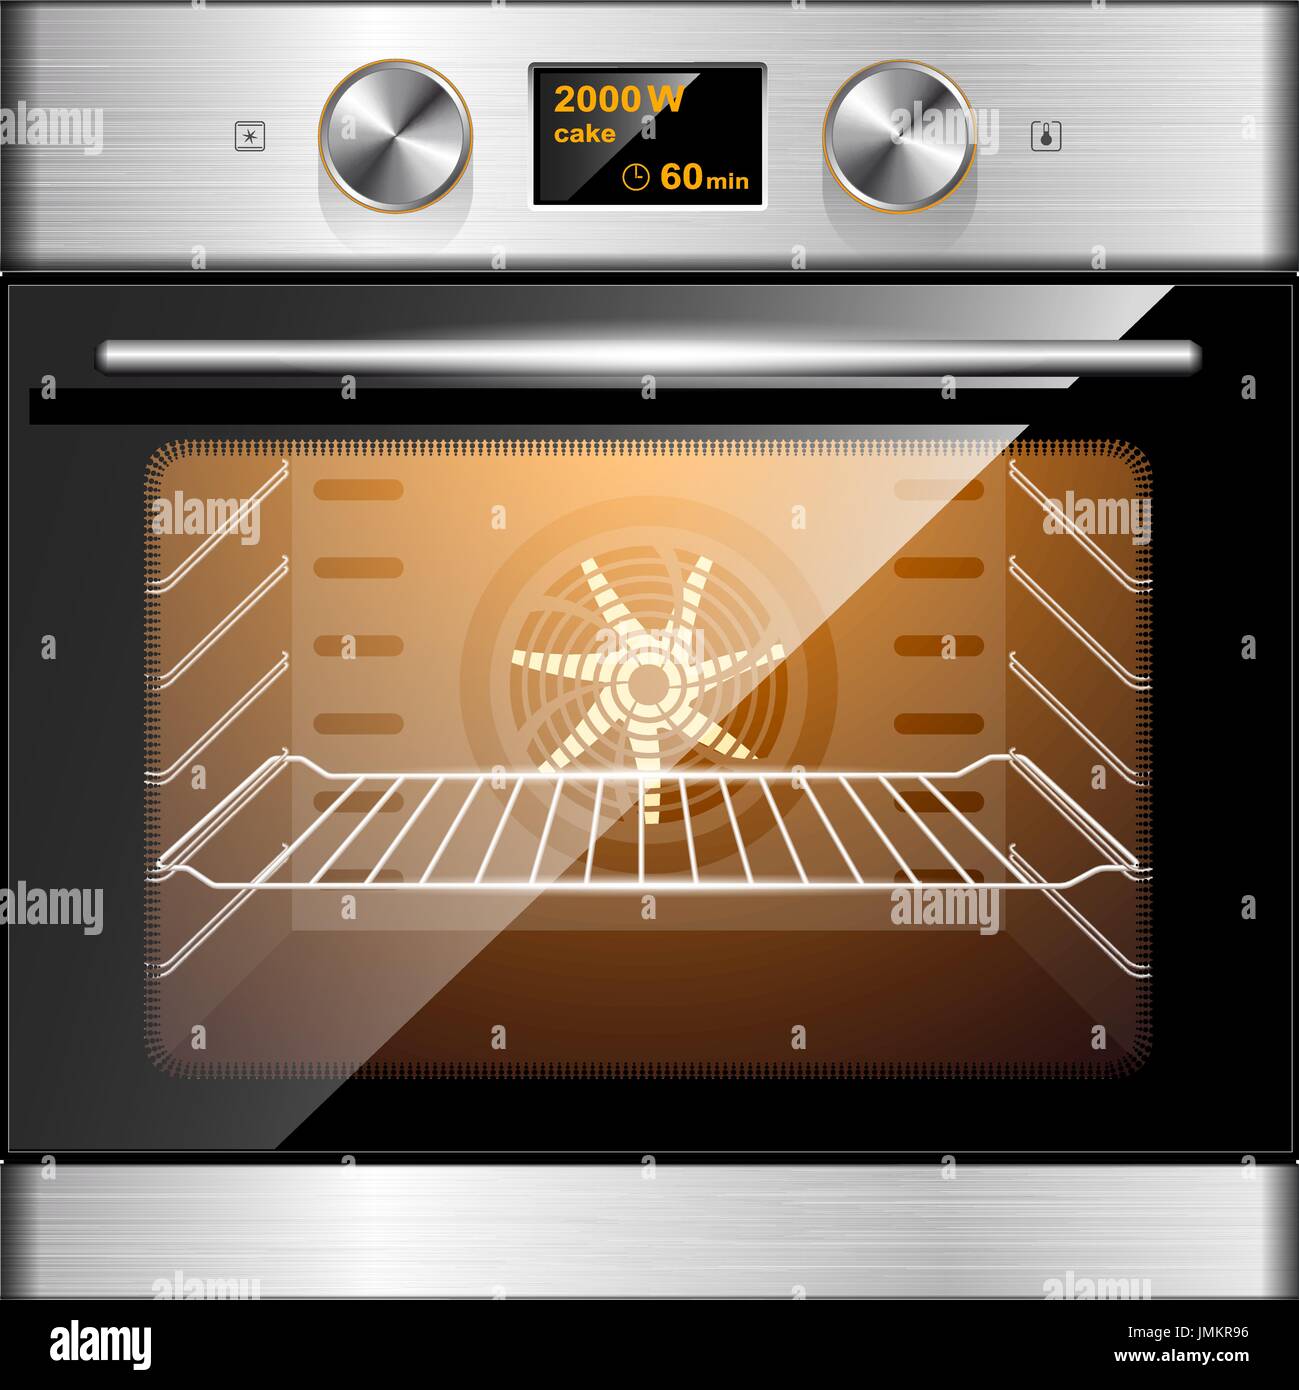 Electric oven in stainless steel and glass. Electronic control. Stock Vector